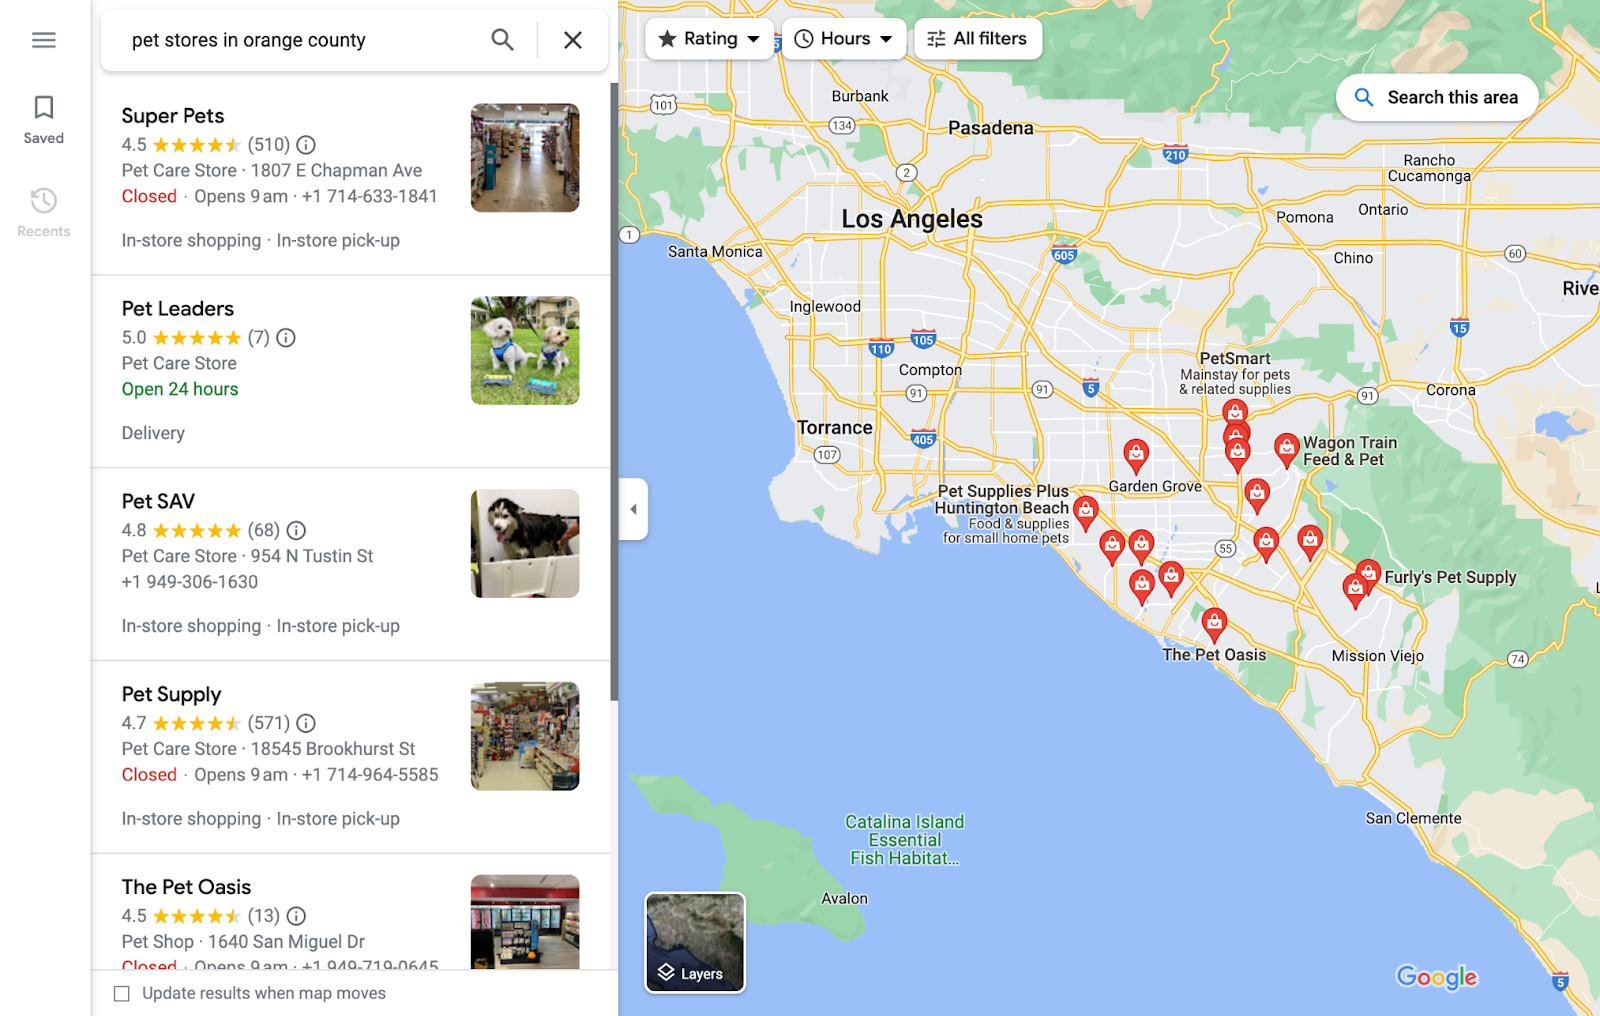 Google local results for "pet stores in orange county"